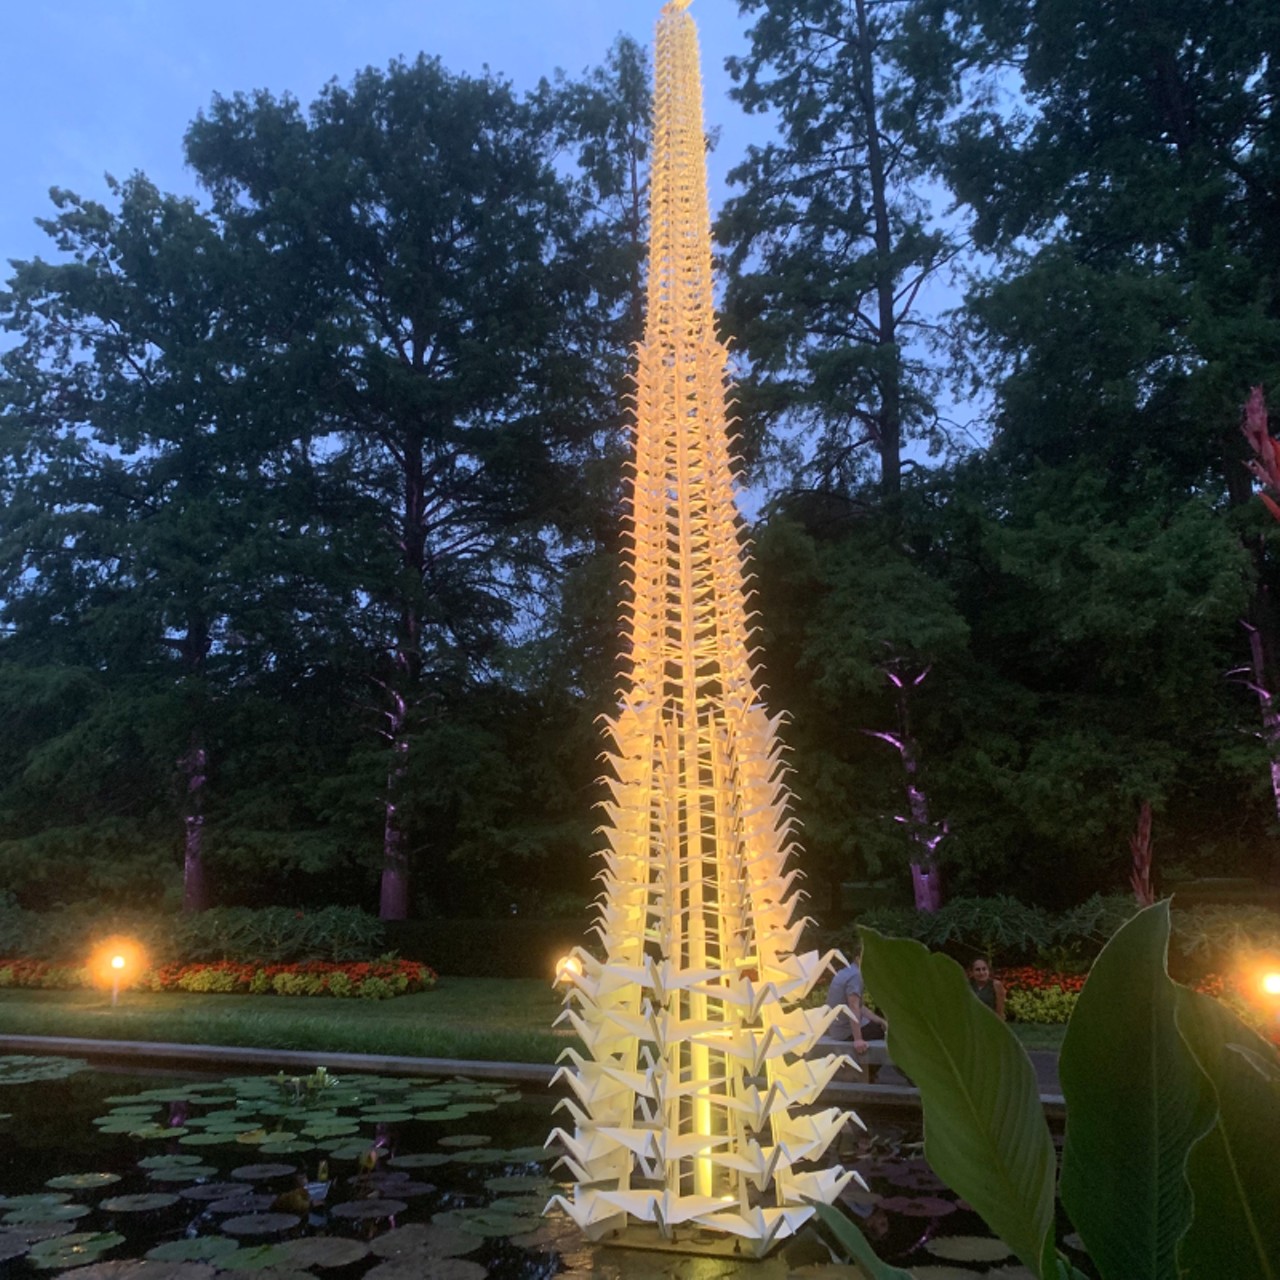 The Missouri Botanical Garden's Origami Exhibit Is a Must See [PHOTOS]